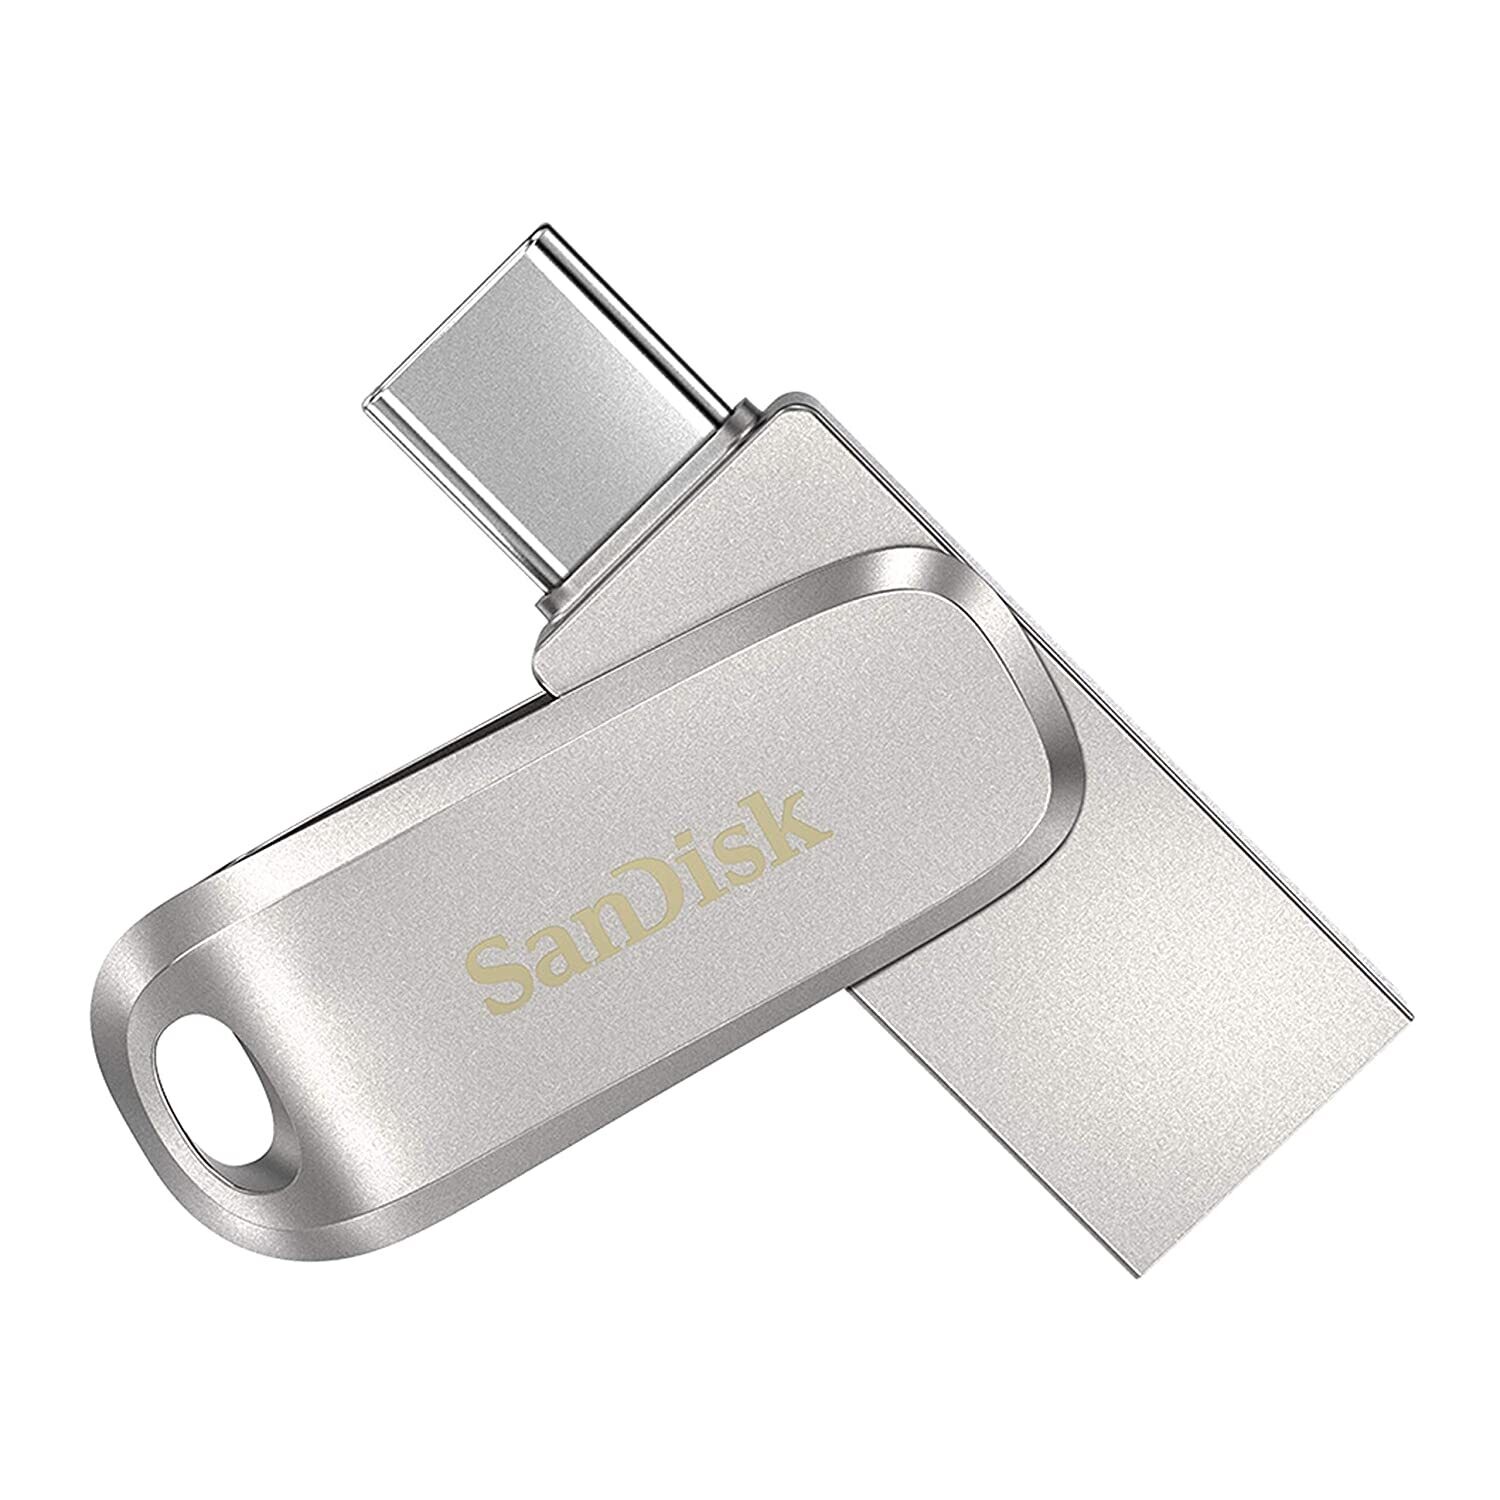 SanDisk 64GB Dual Drive Luxe USB Type-C Pen Drive for mobile